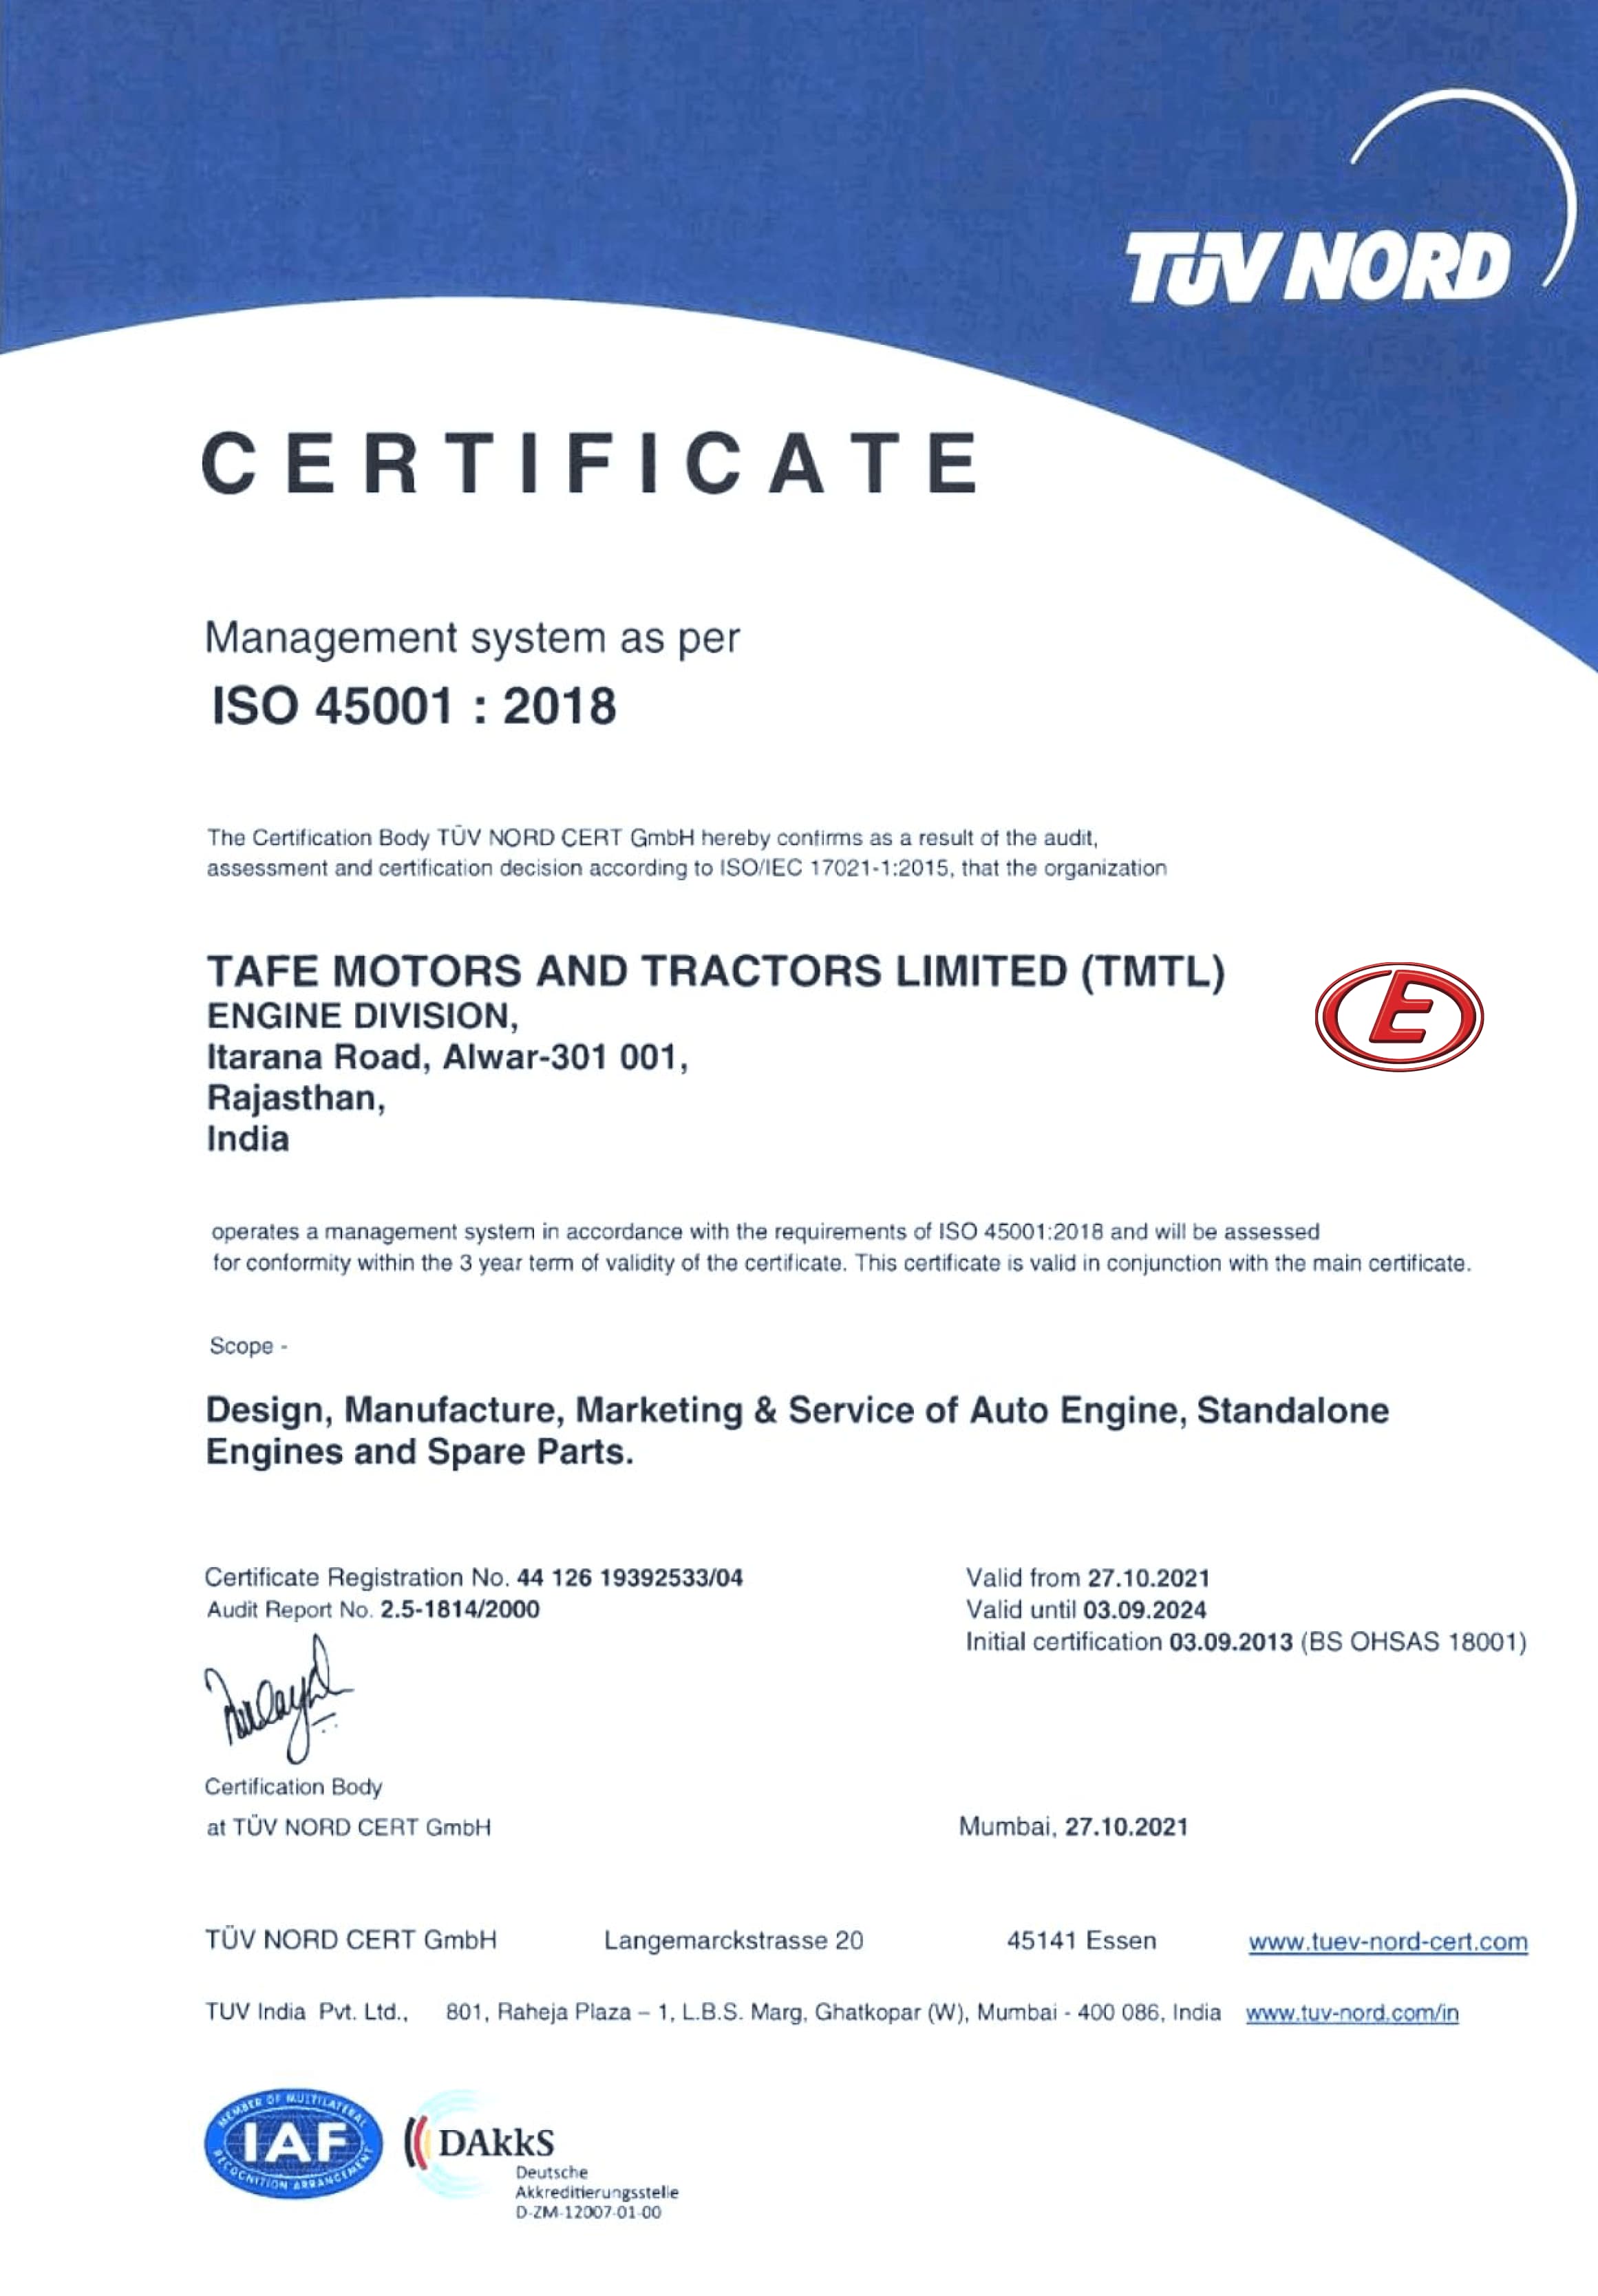 TMTL Engine | Certifications